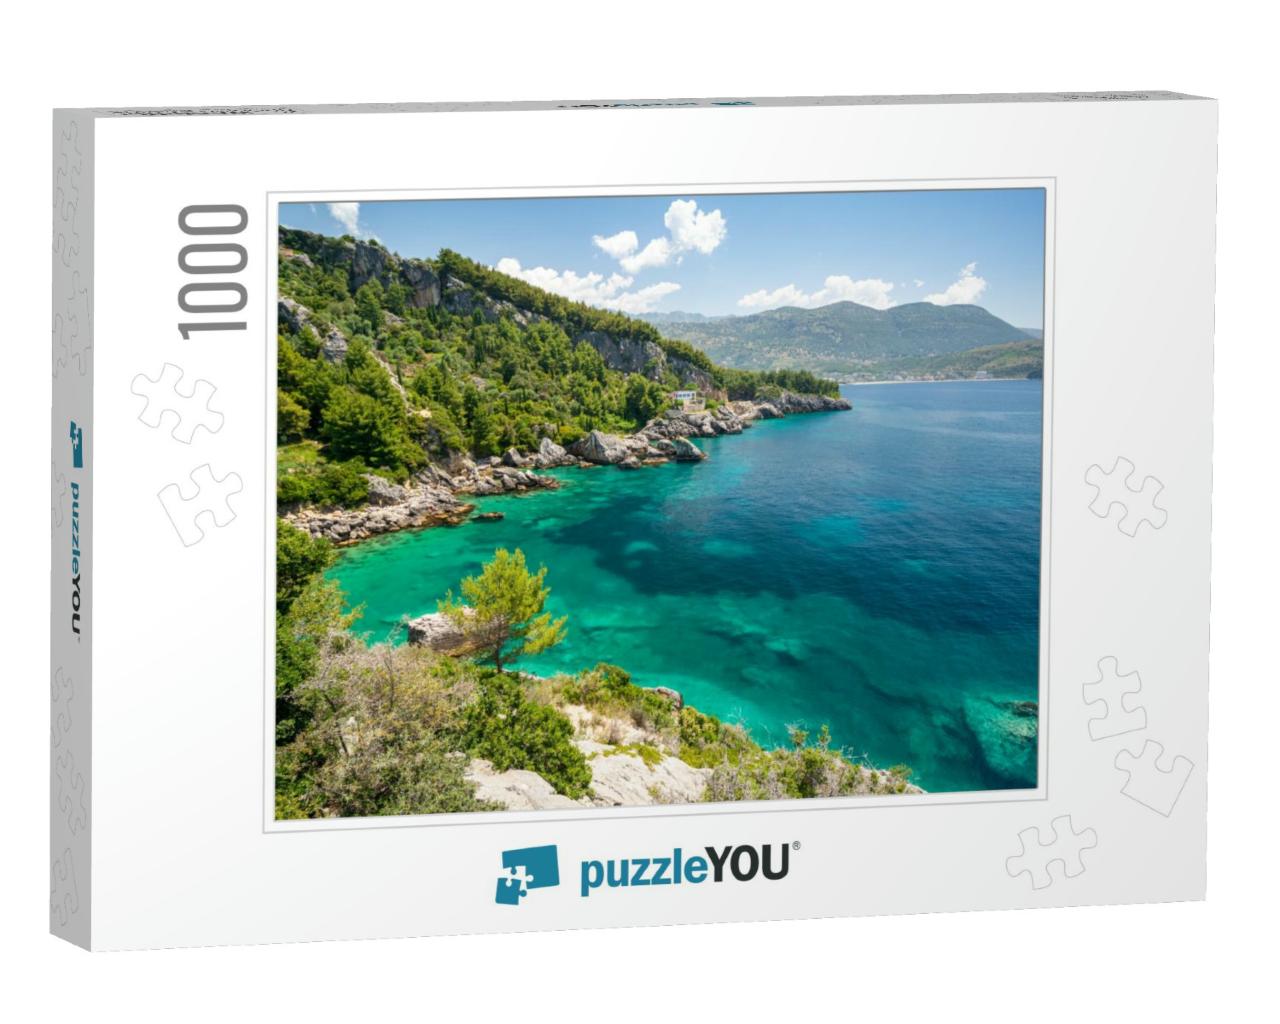 Amazing View on Coast in Himare, Albanian Riviera, Albani... Jigsaw Puzzle with 1000 pieces